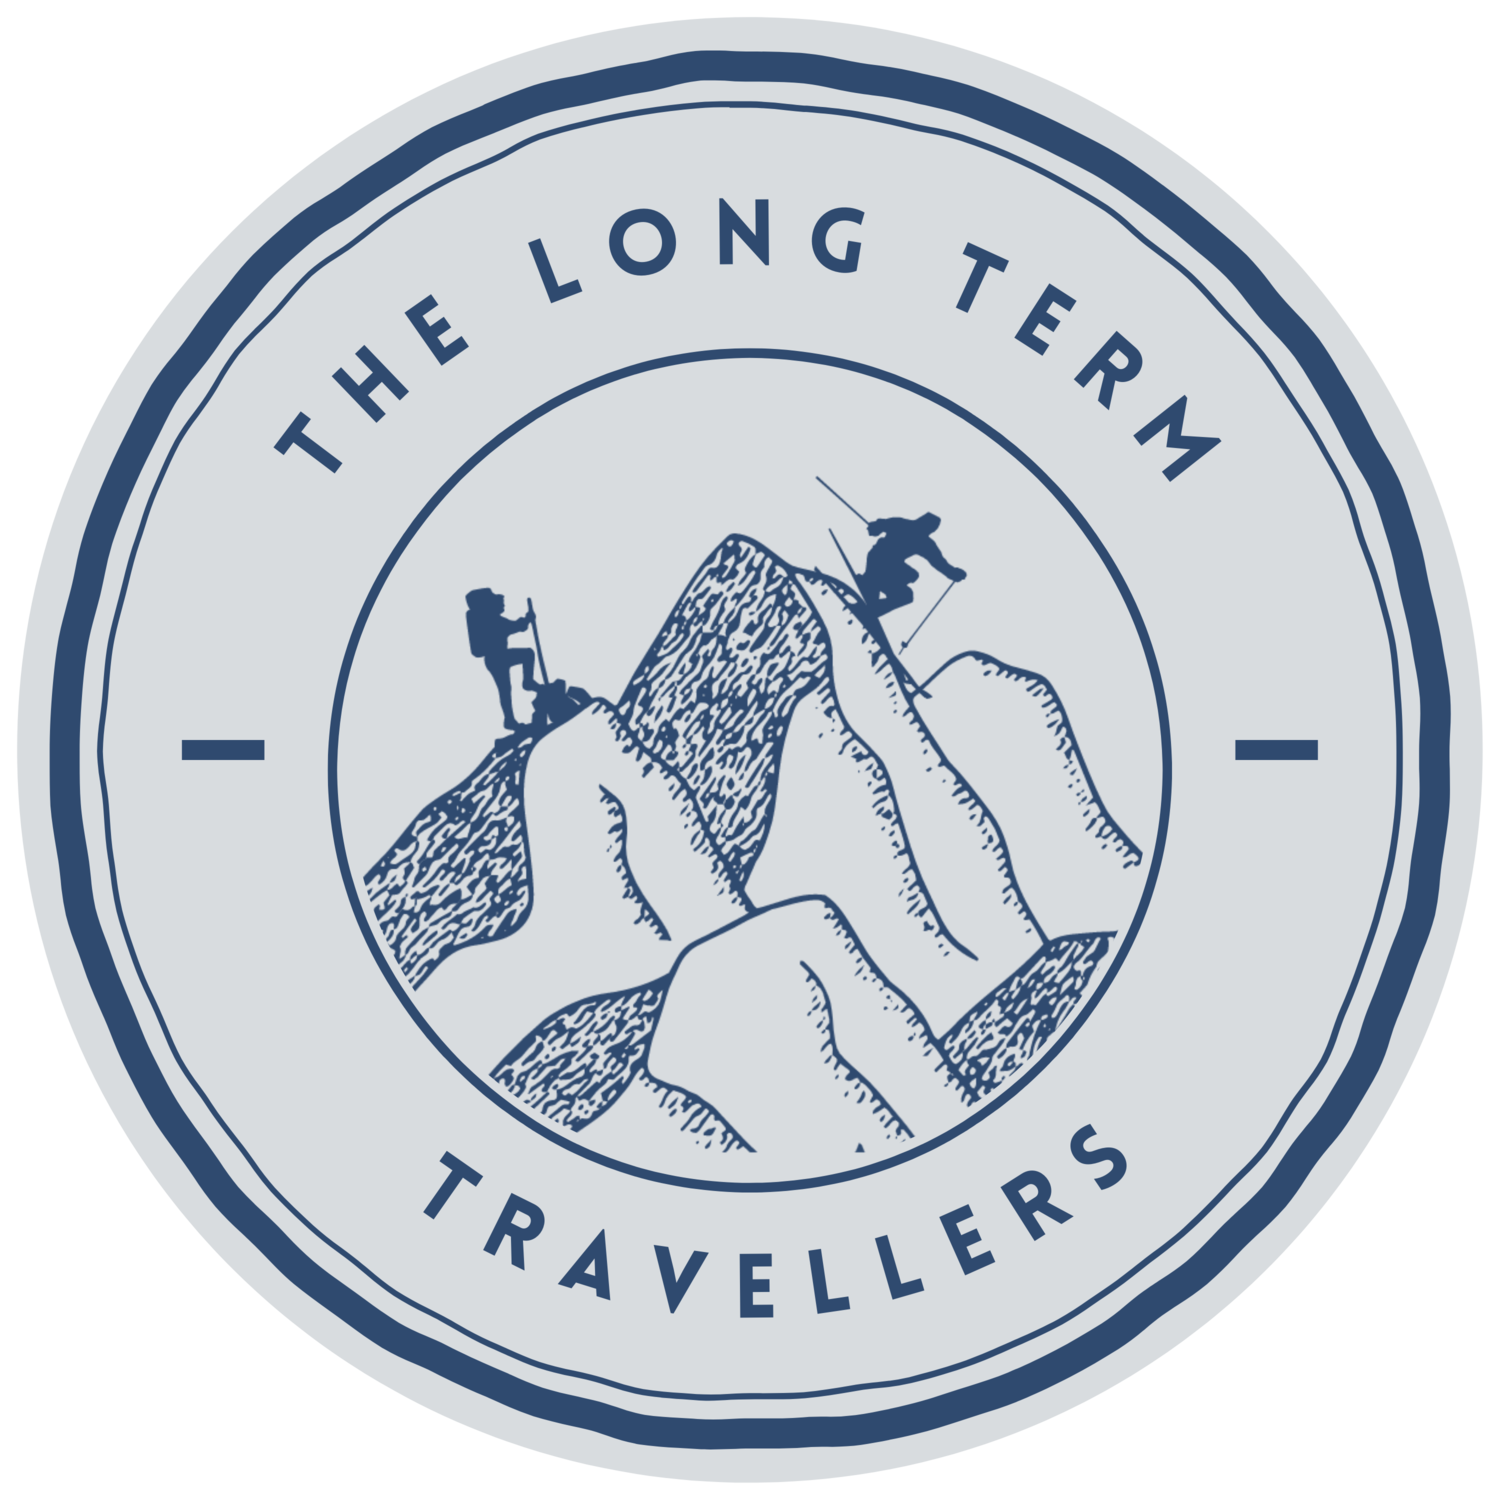 The Long Term Travellers